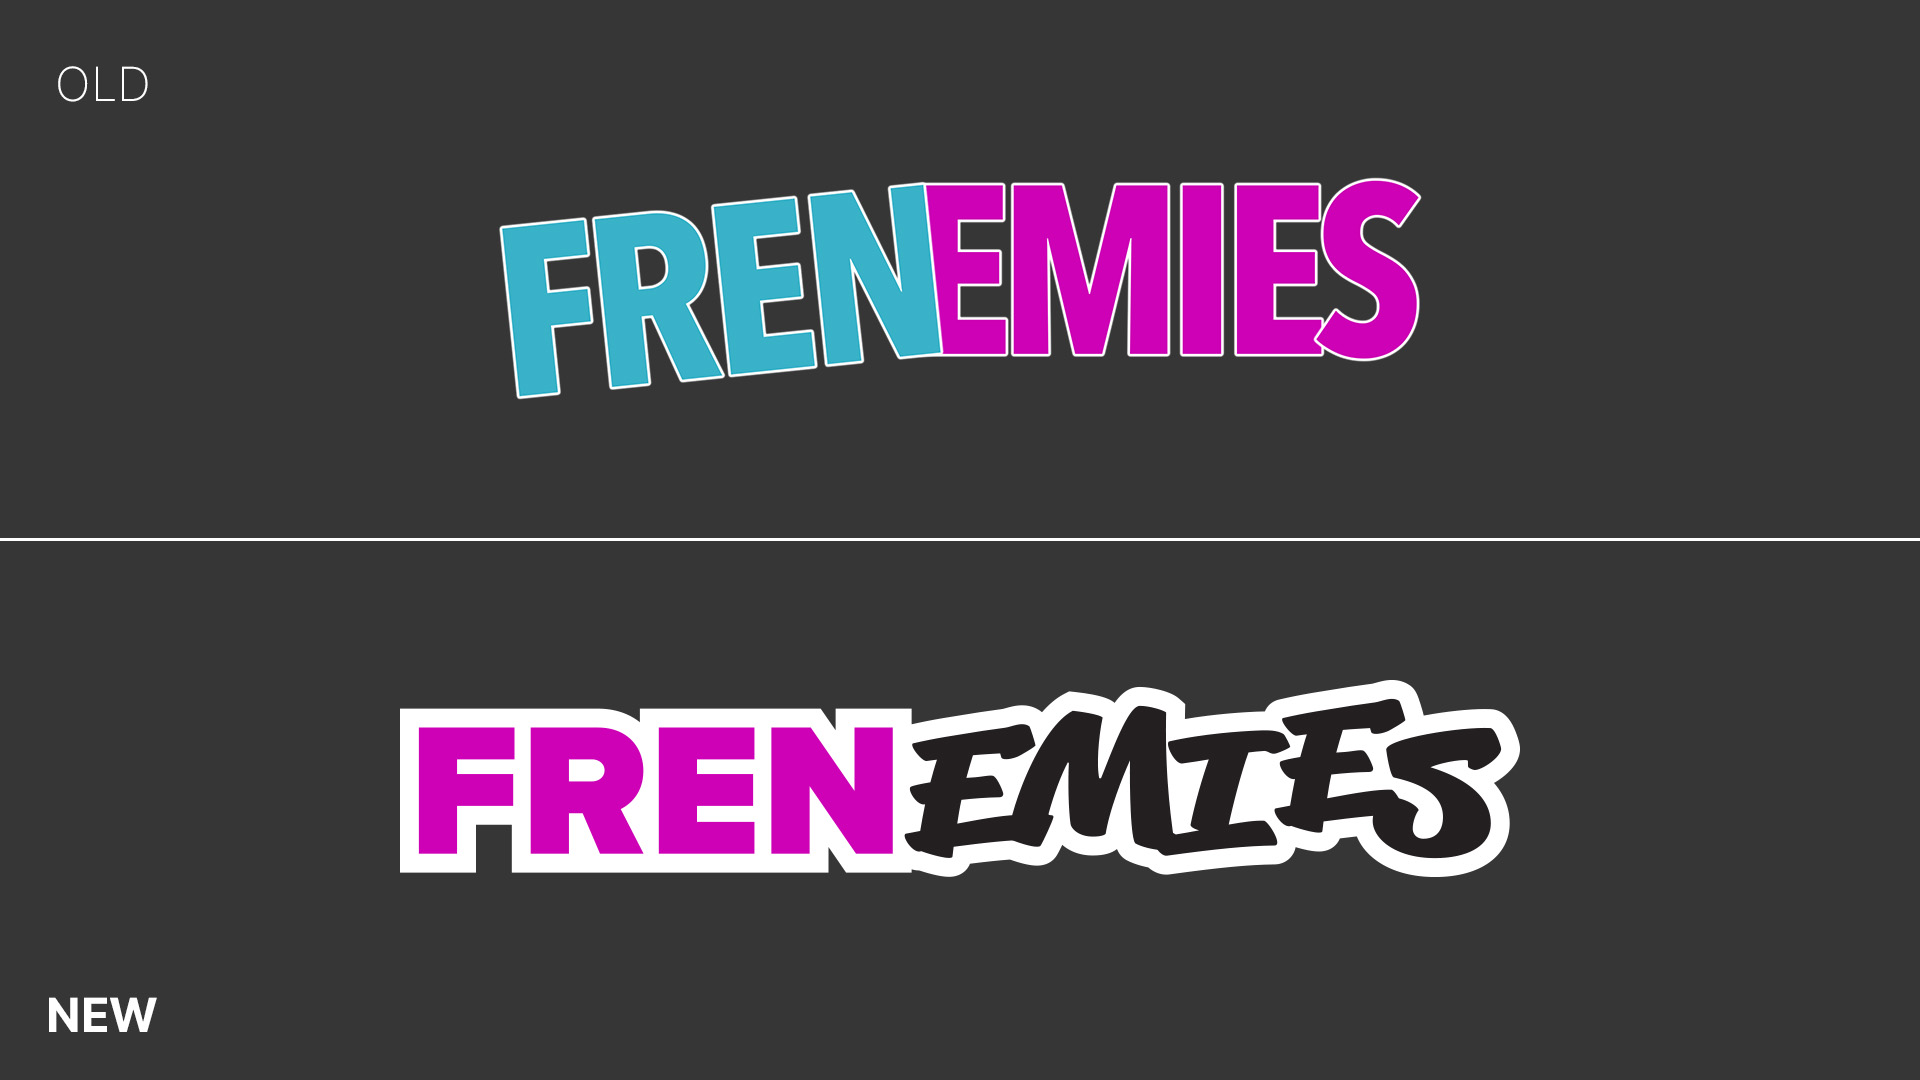 A comparison of Frenemies' old and new logo